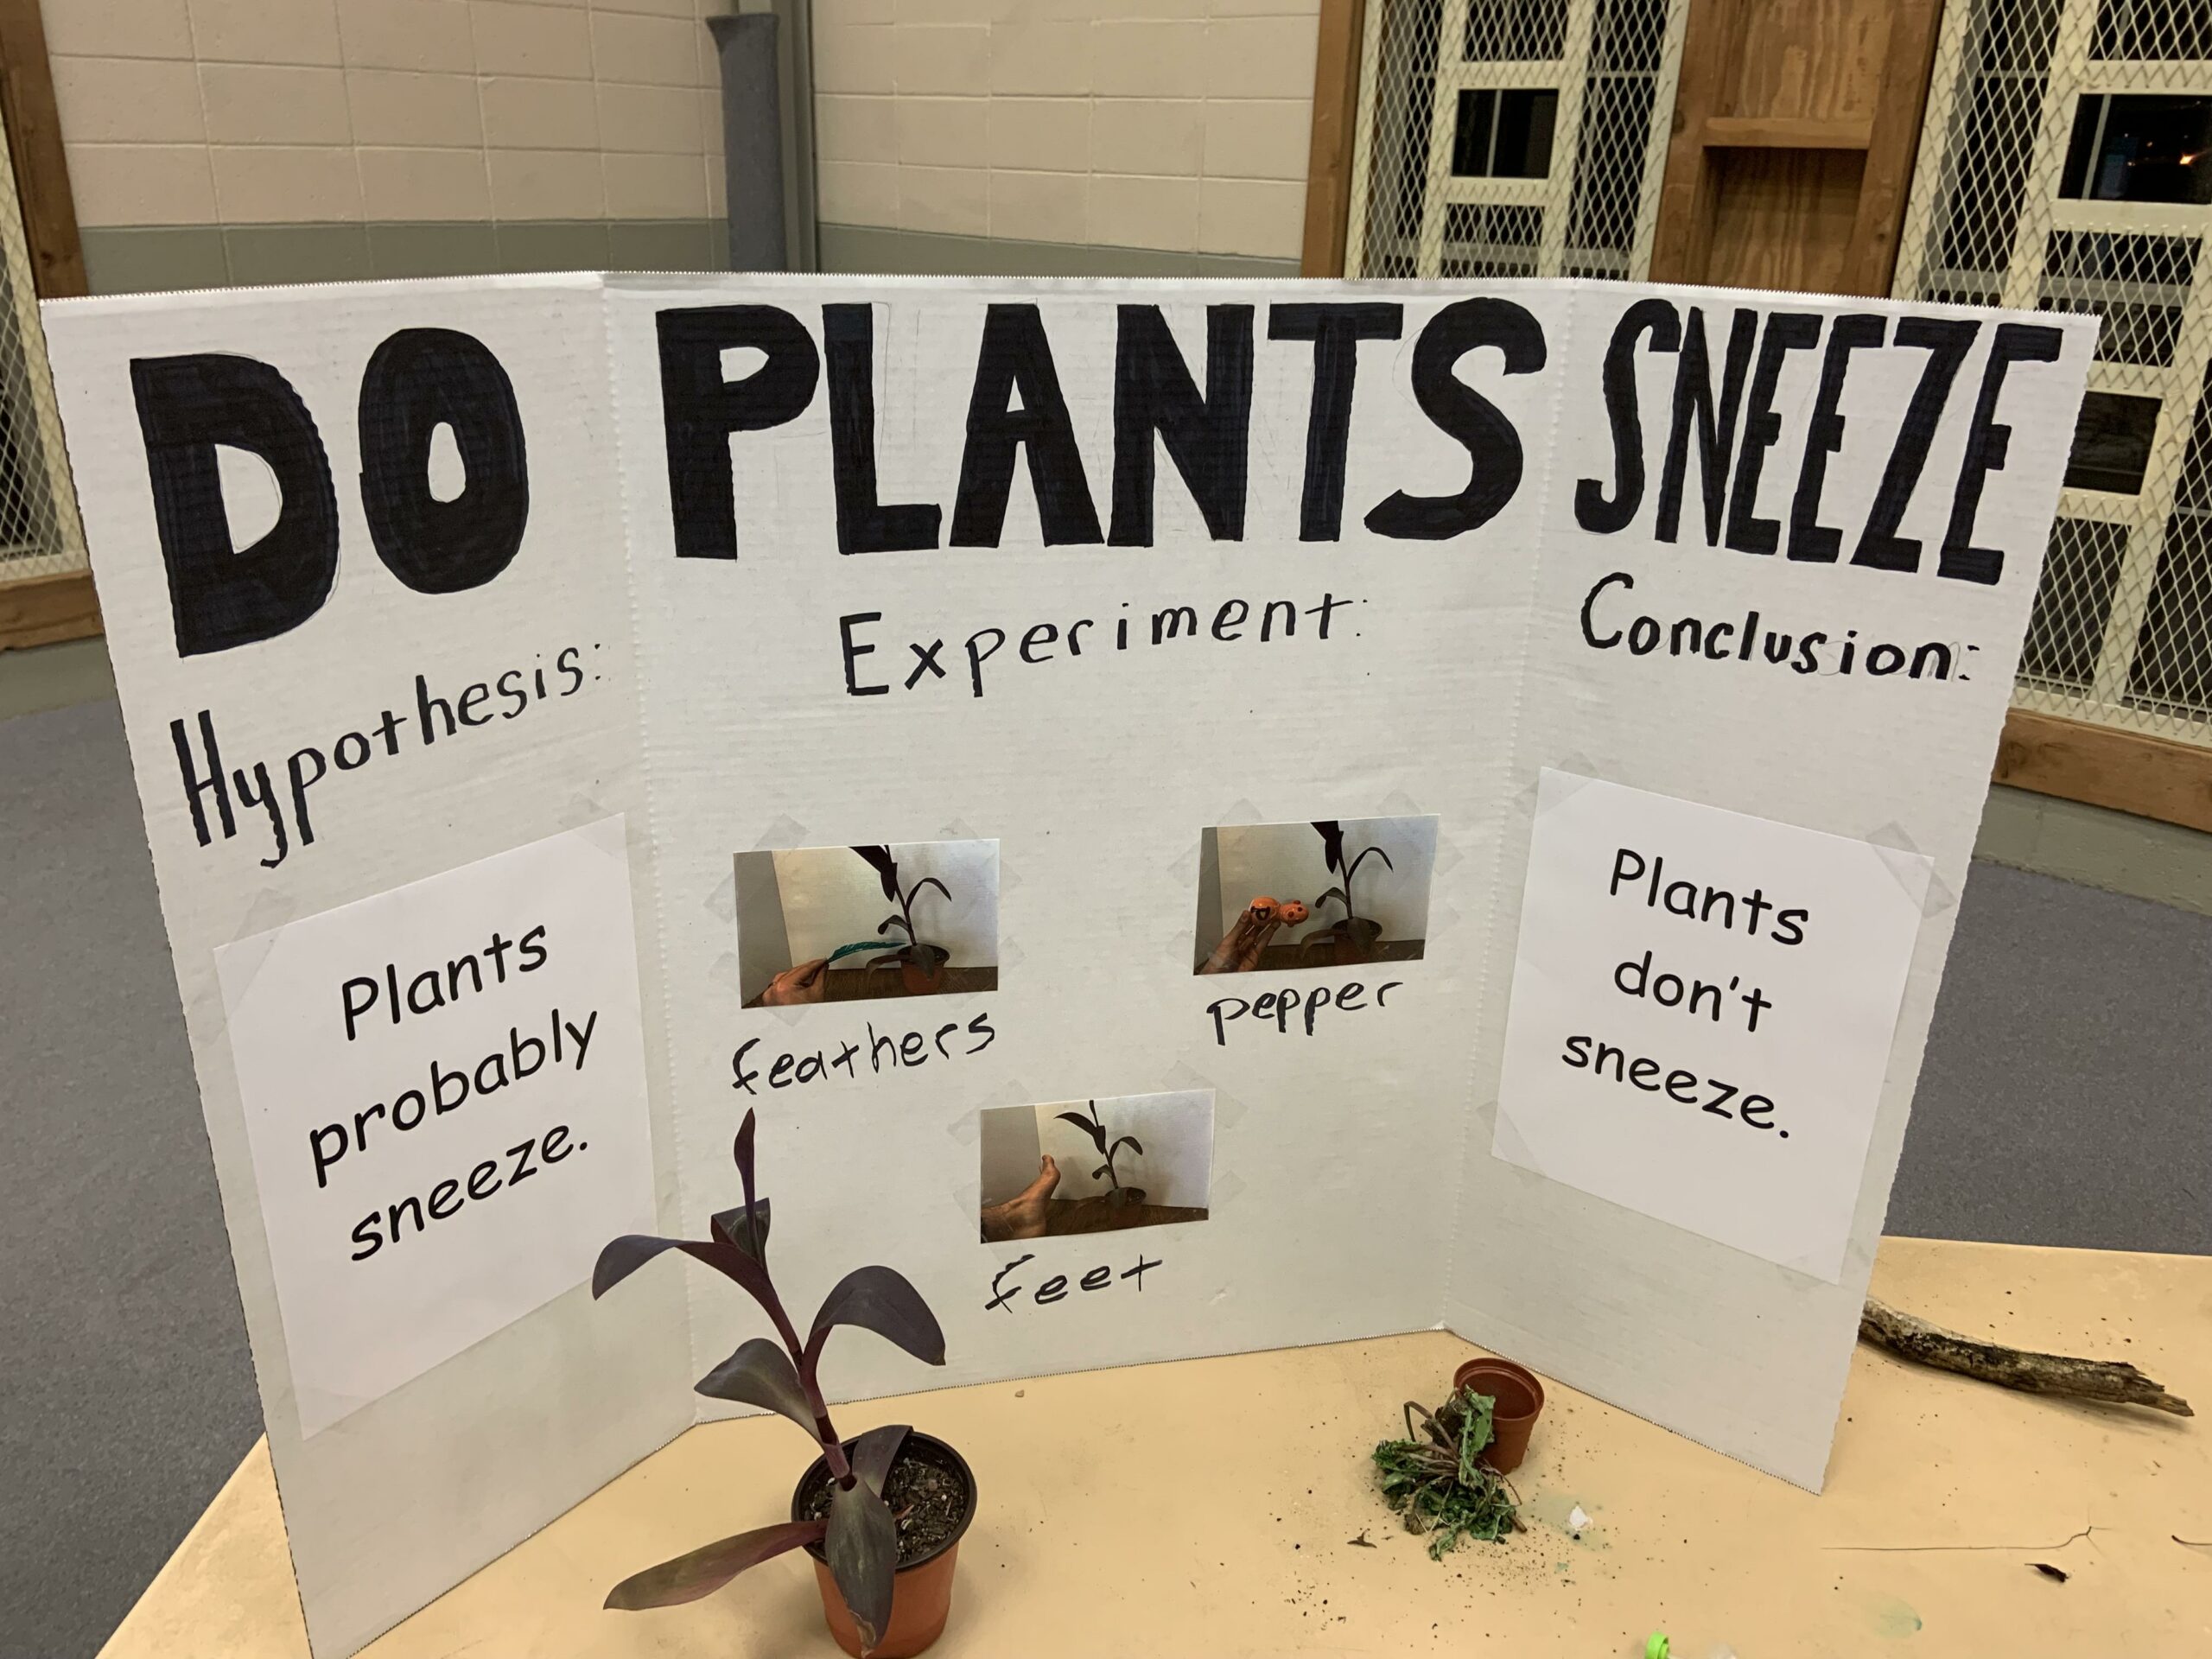 Poster board for a school science fair that asks the research question, “Do plants sneeze?”